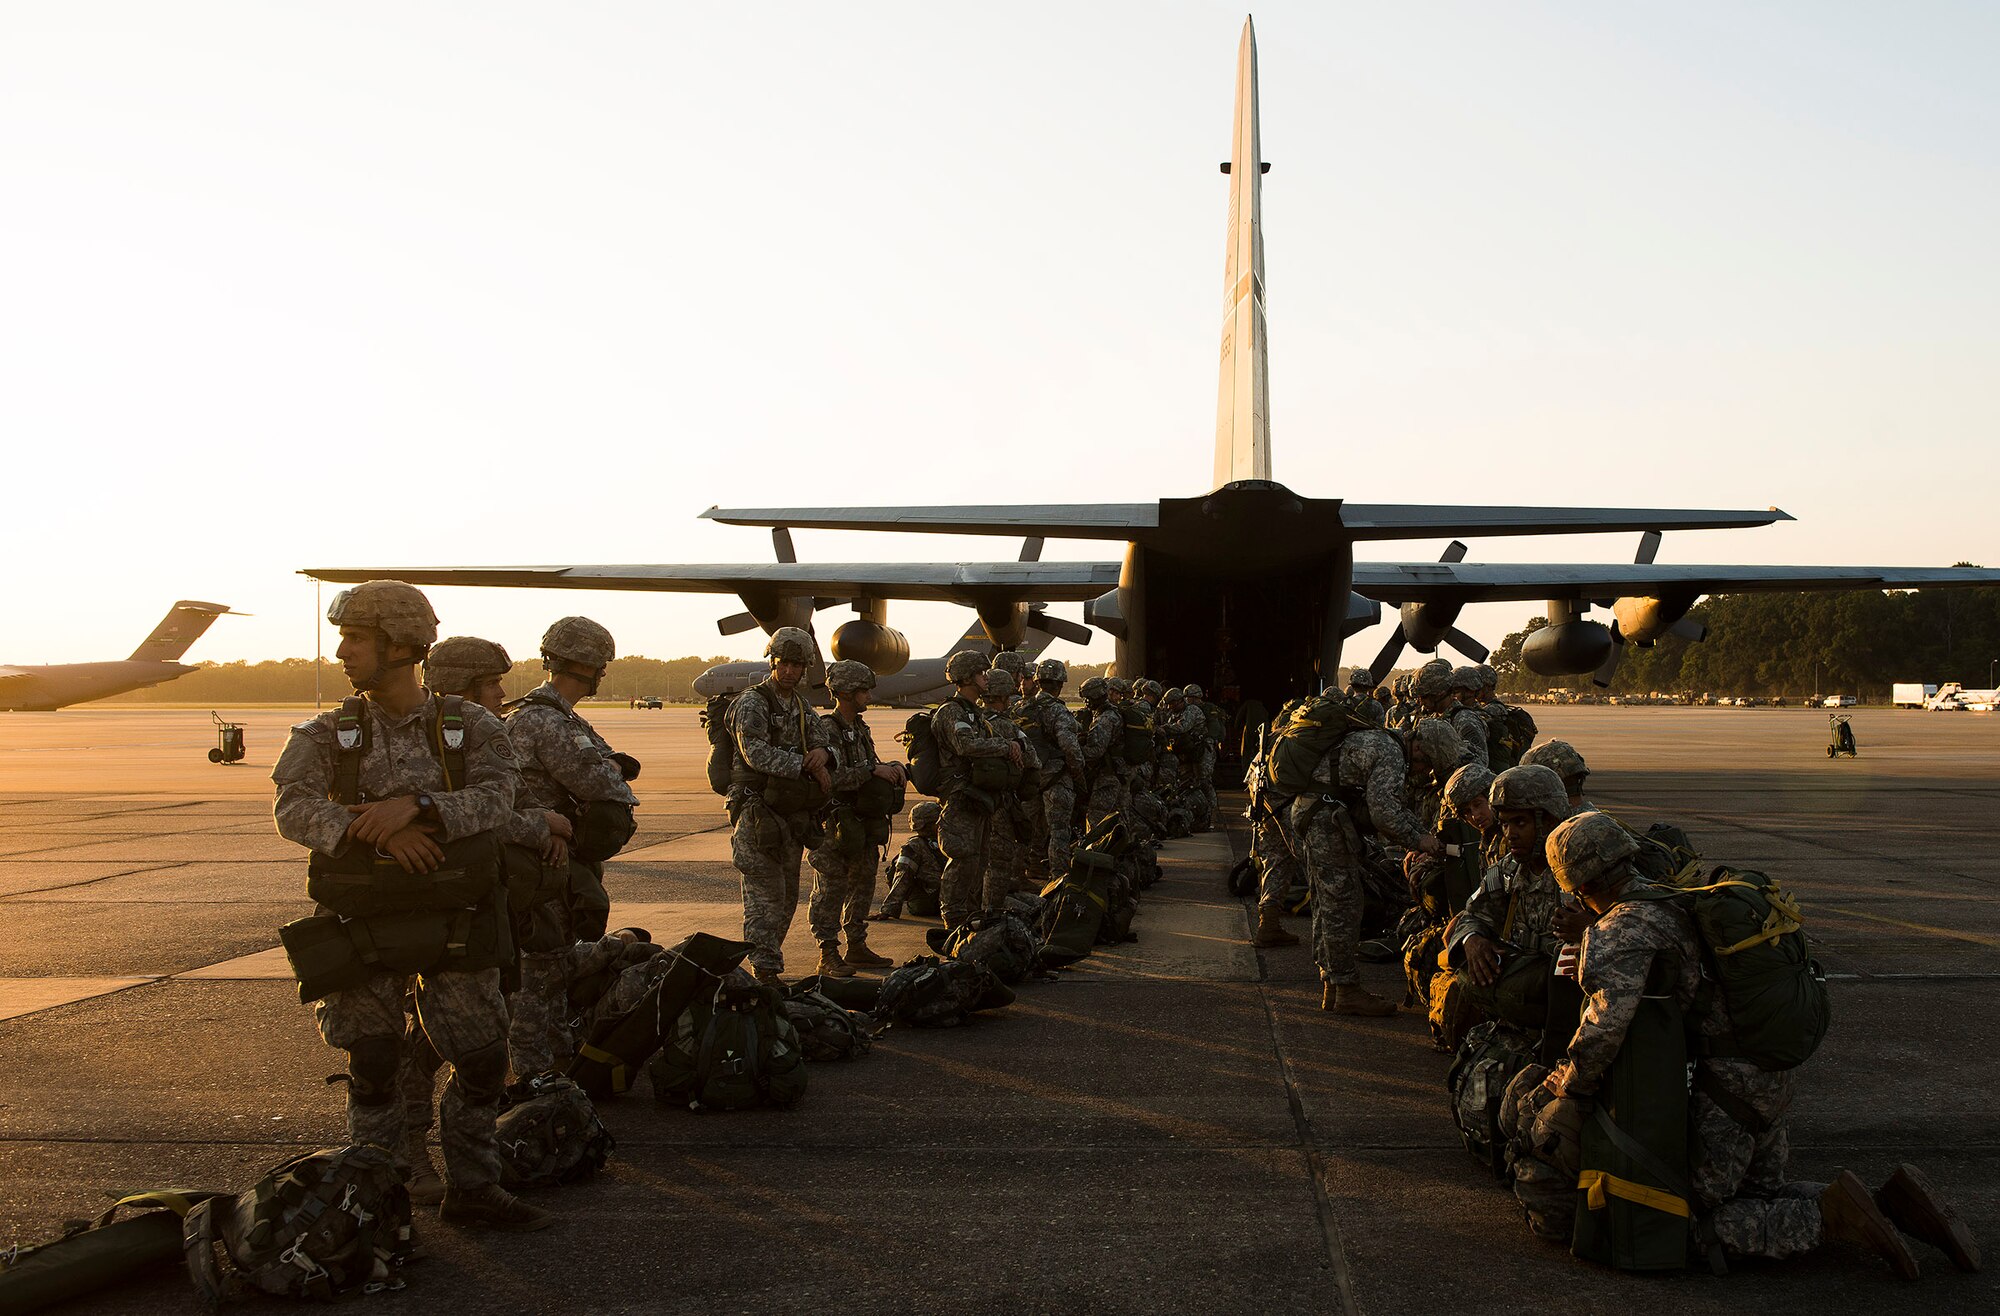 U.S. Army paratroopers from the 82nd Airborne Division perform an equipment check before boarding a C-130H Aug. 18, 2013, at Alexandria International Airport, La. The paratroopers were conducting a static line drop that marked the beginning of Joint Operational Access Exercise 13-0X. (U.S. Air Force photo by Staff Sgt. Russ Scalf)